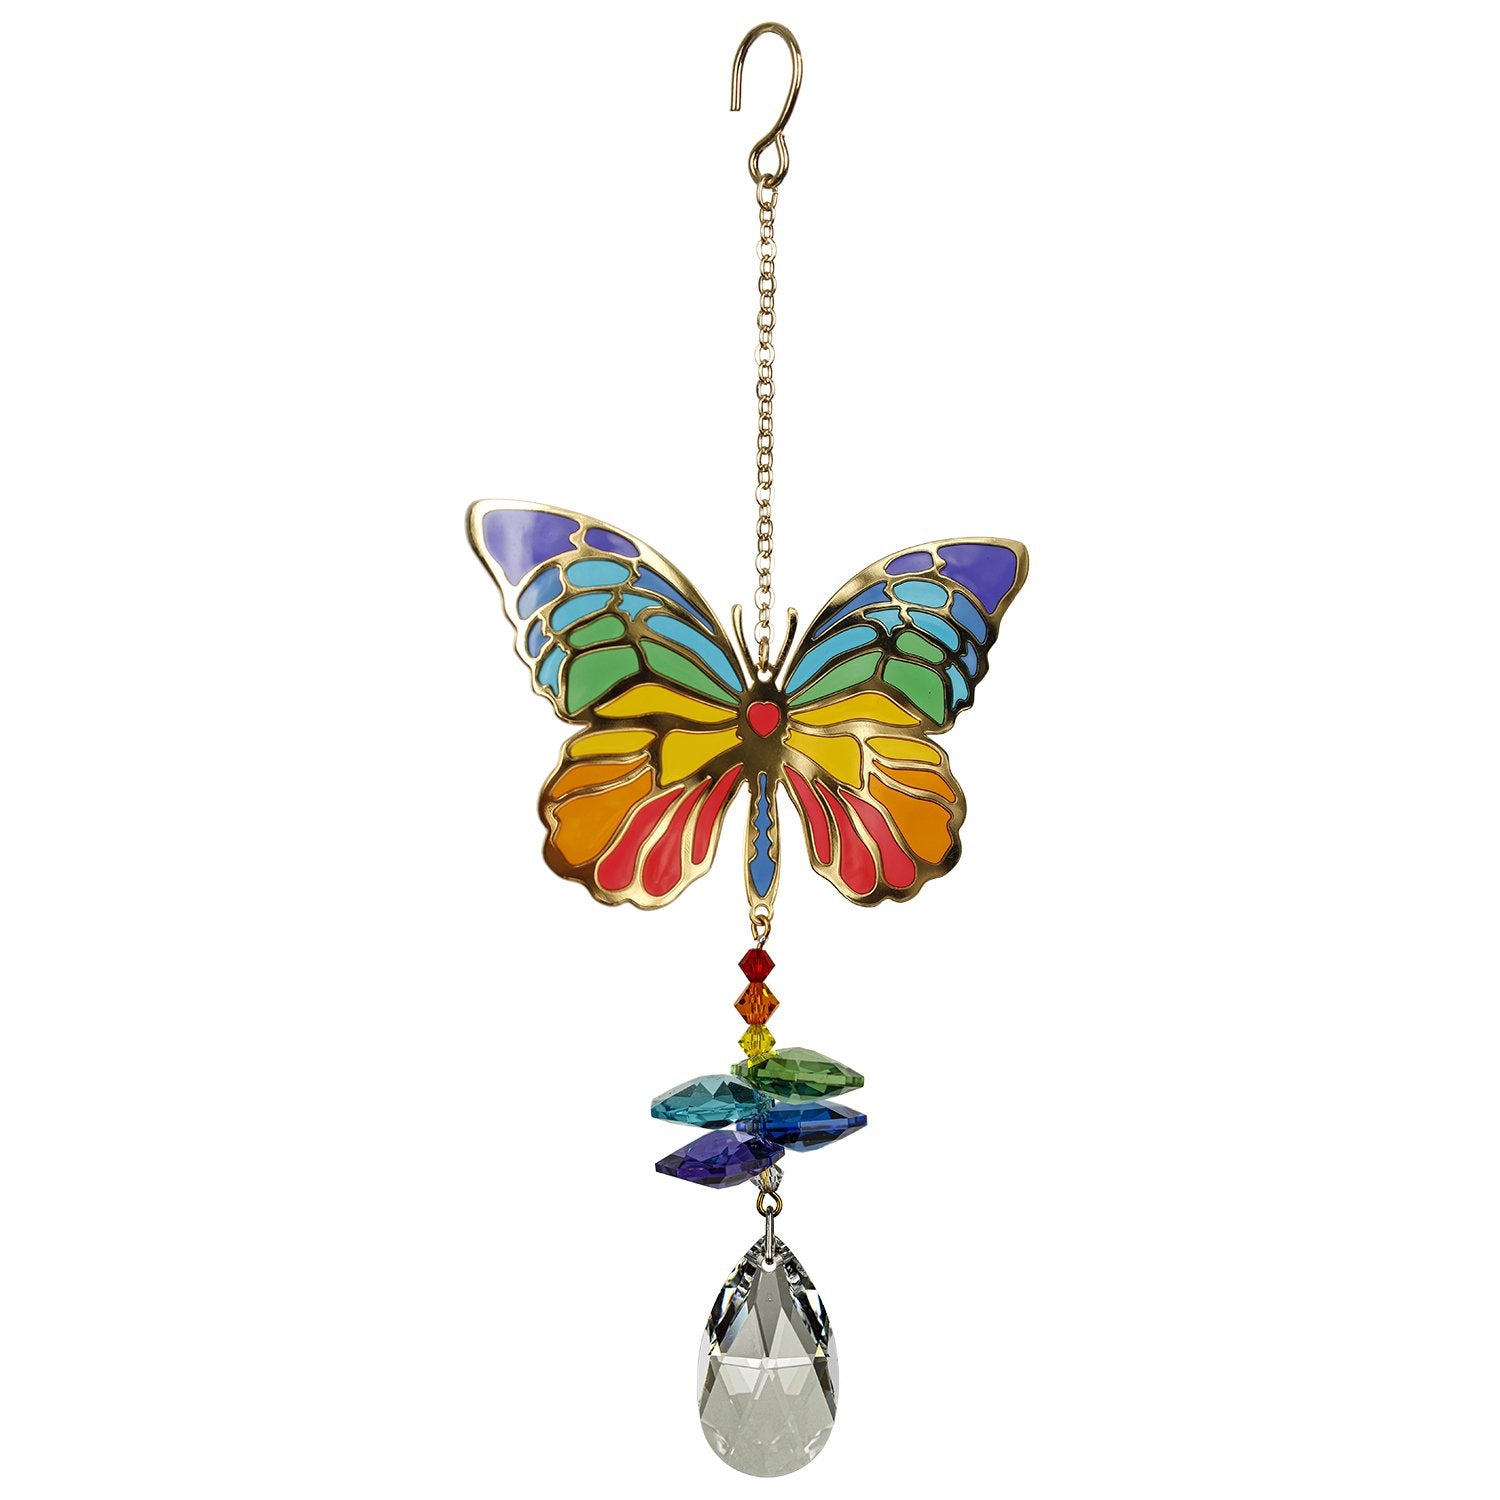 Crystal Wonders - Butterfly full product image